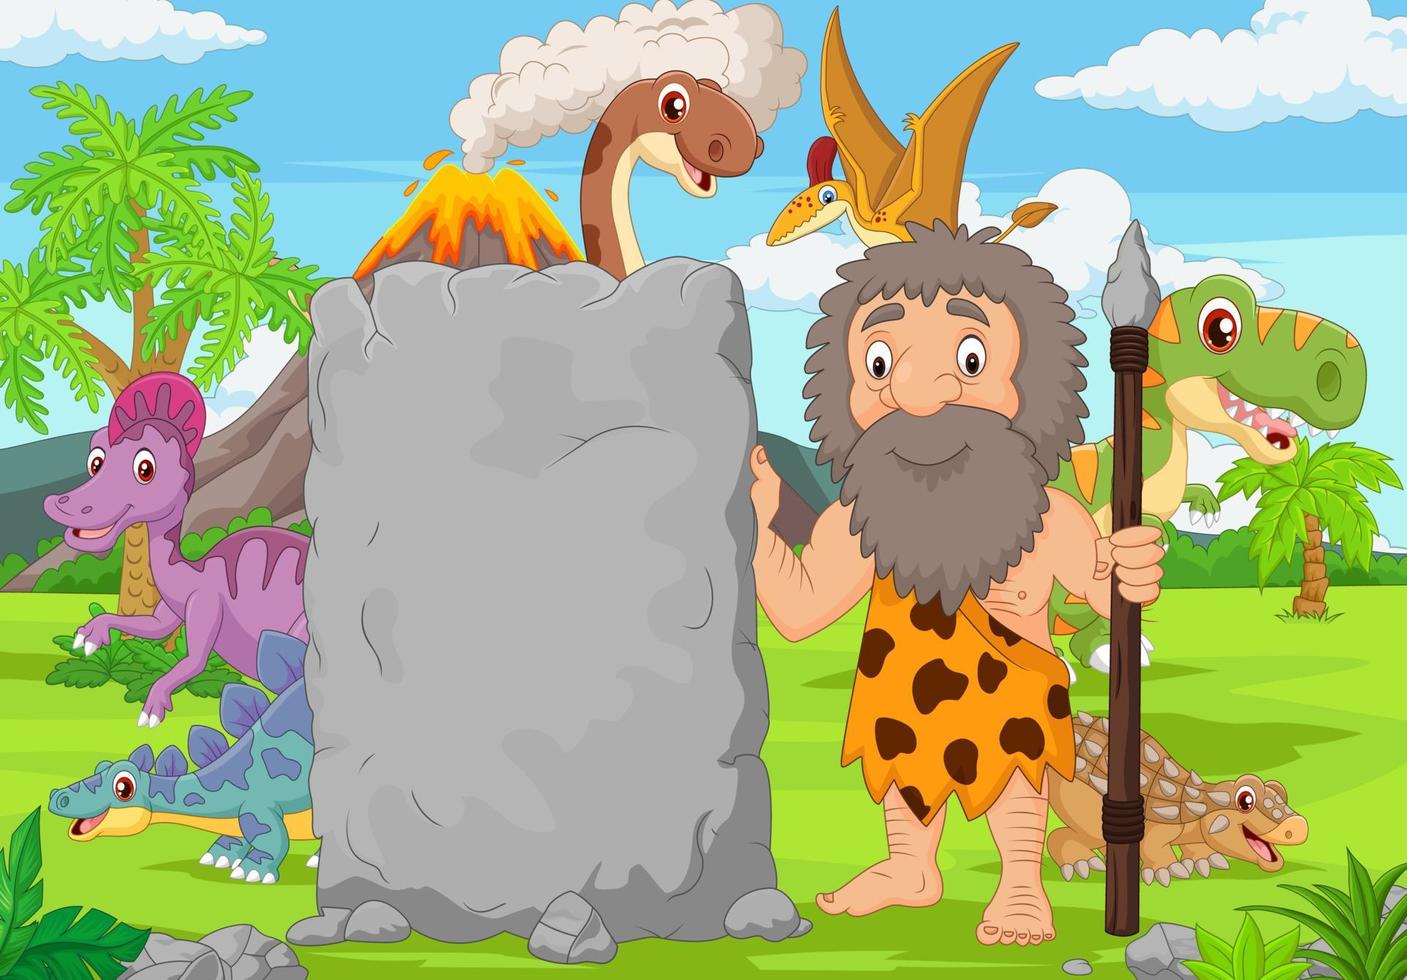 Cartoon caveman holding stone sign in the forest vector